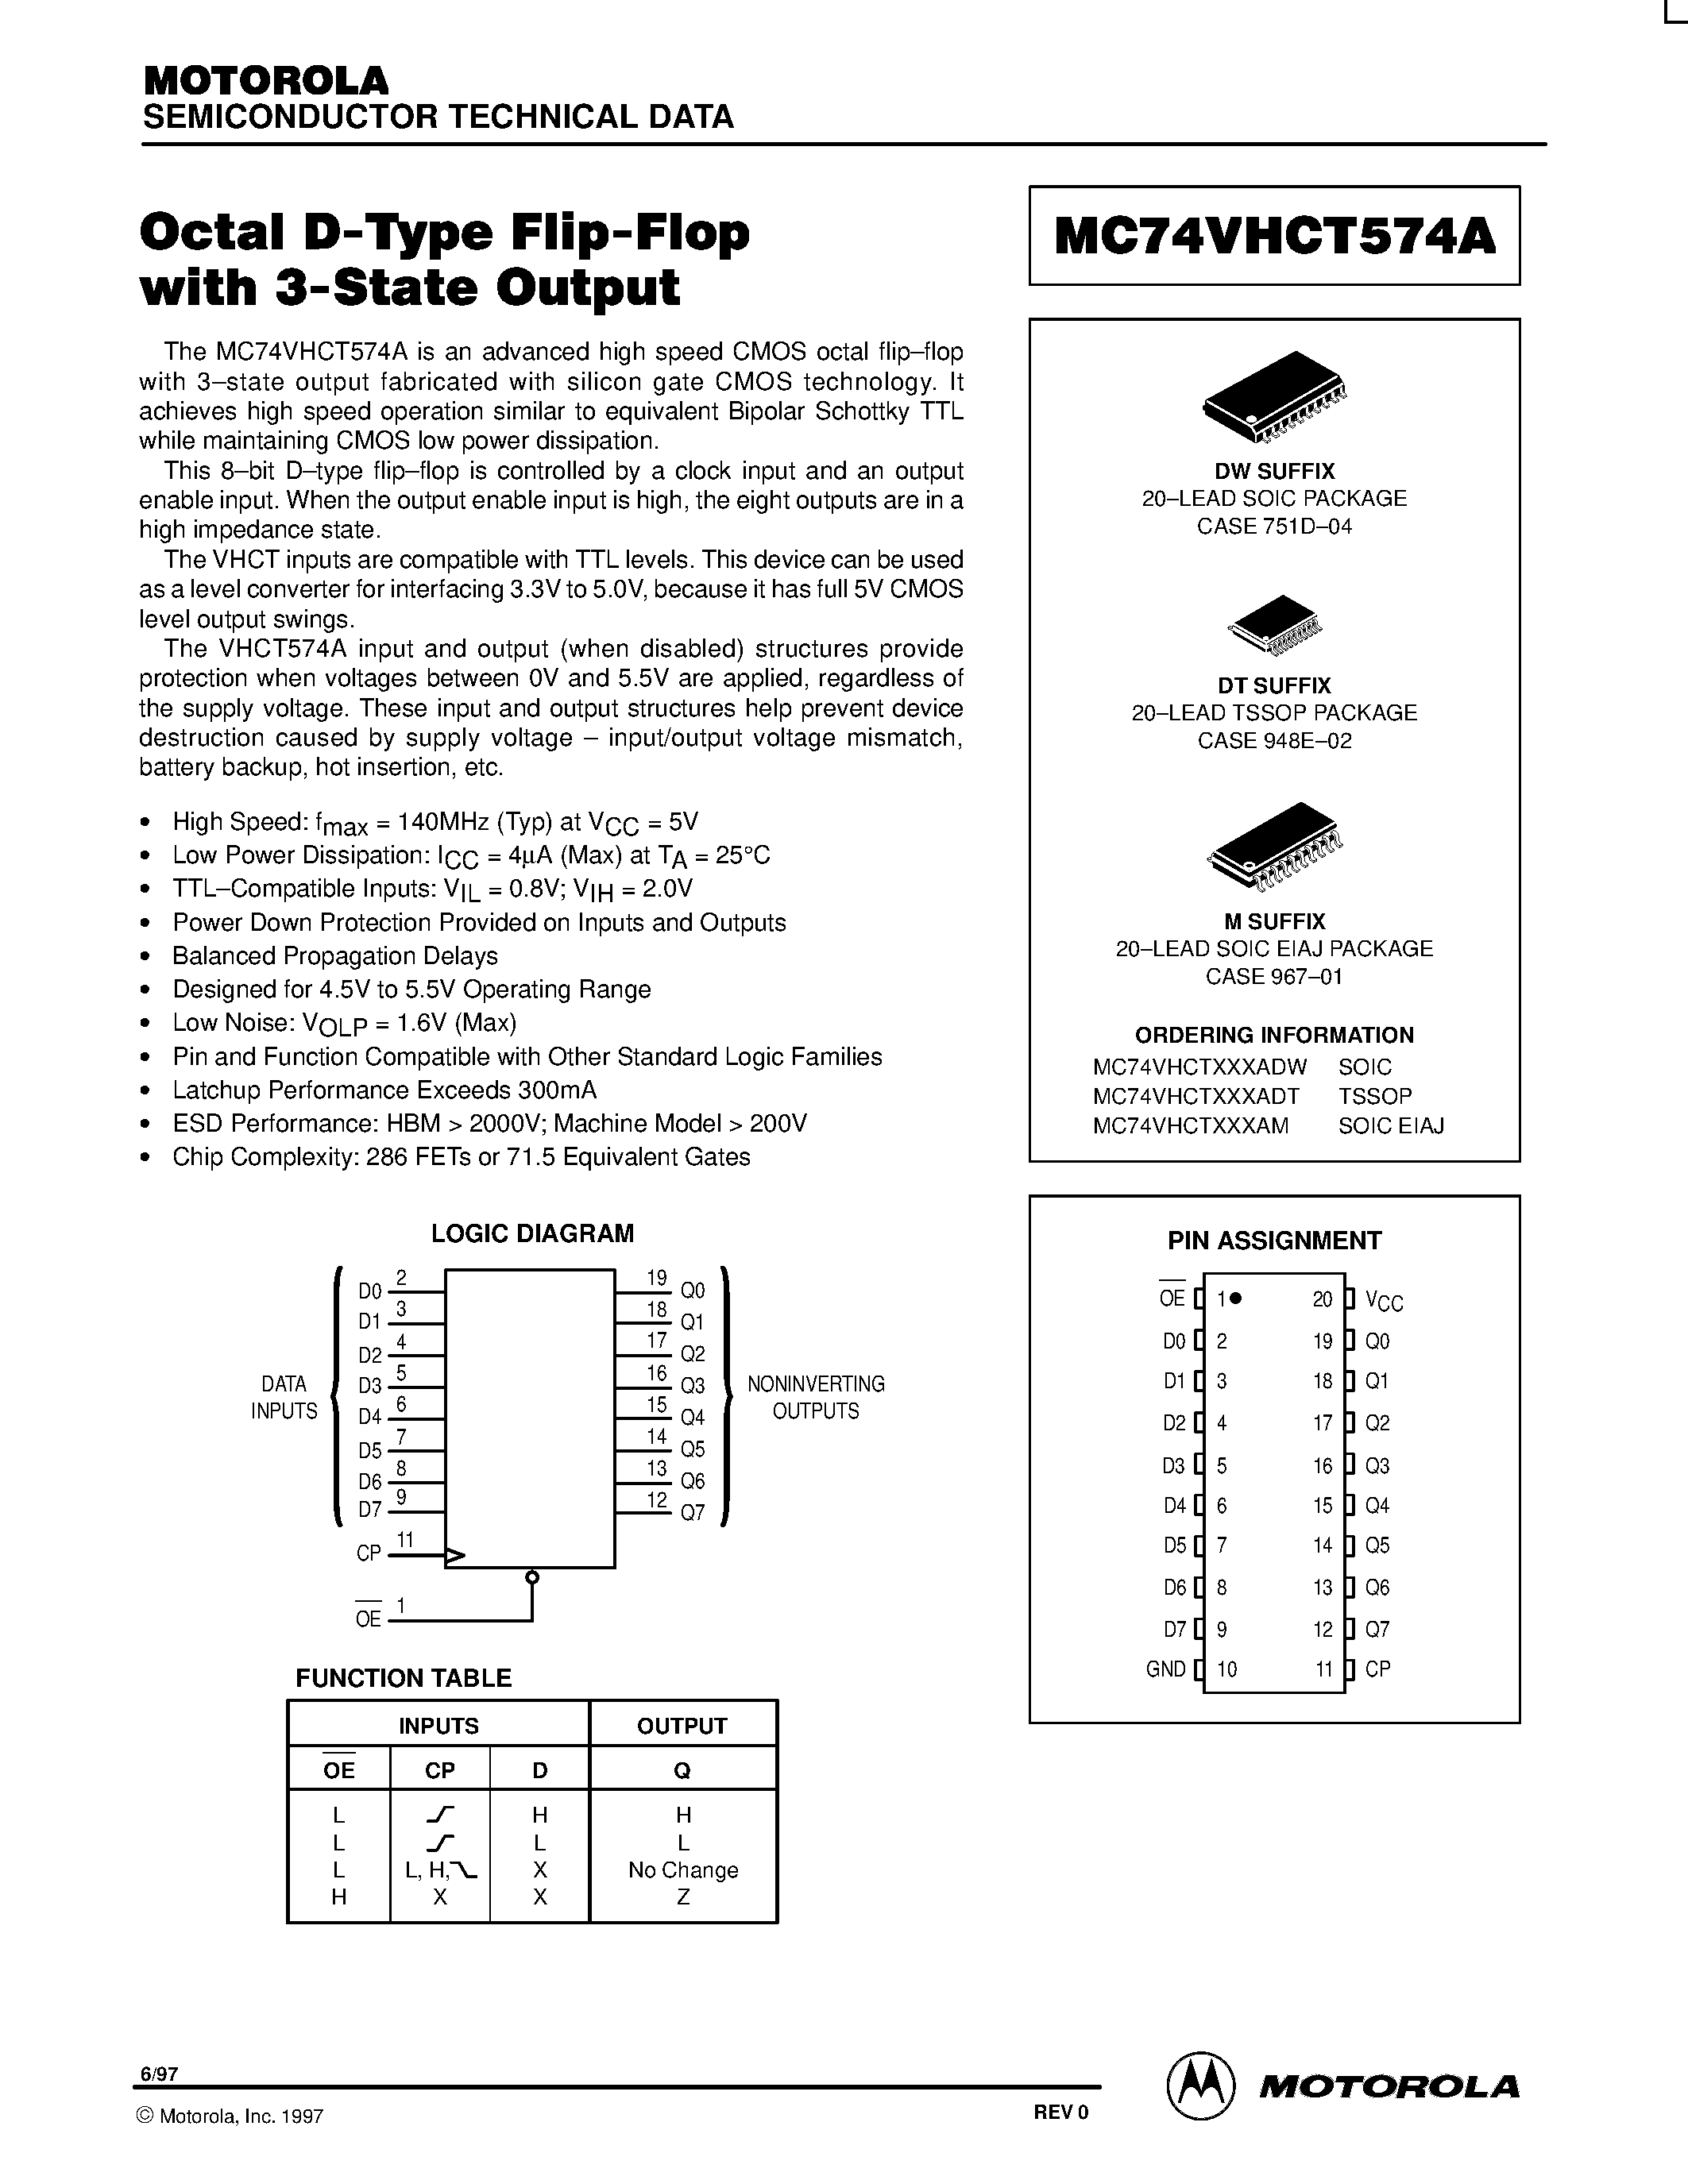 Datasheet MC74VHCT574A - Octal D-Type Flip-Flop with 3-State Output page 1